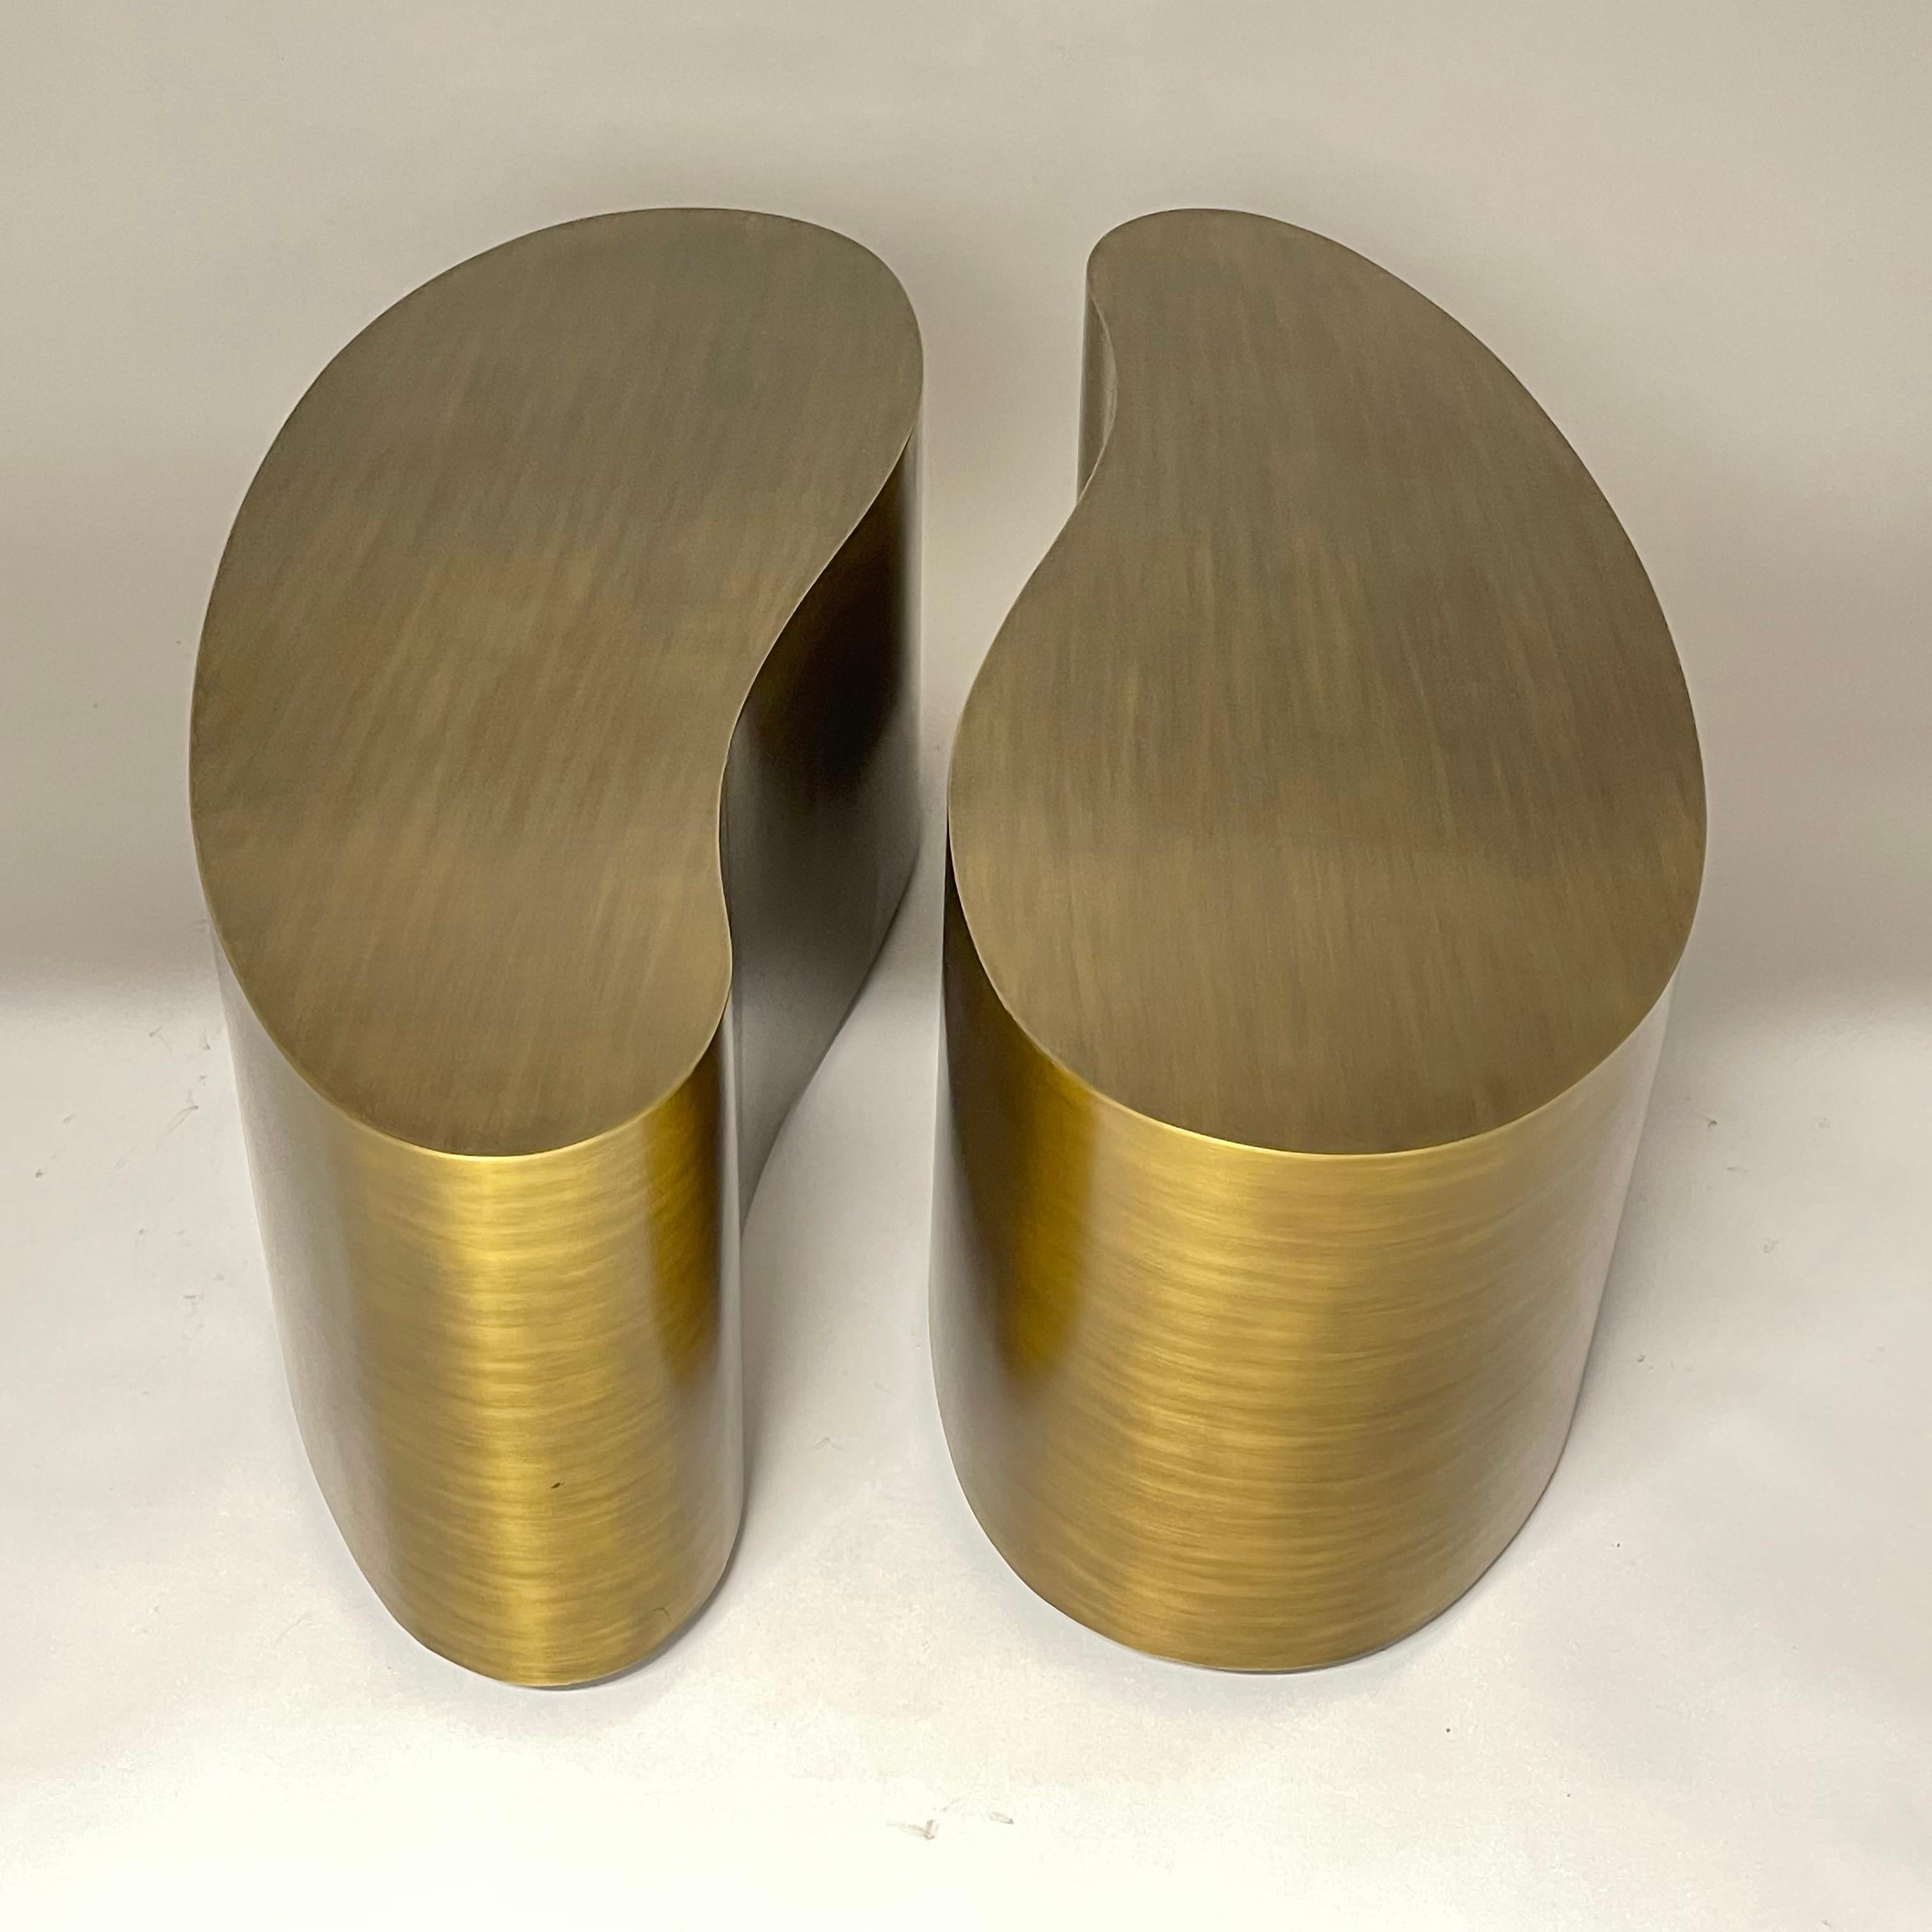 Pair of Karl Springer, Silas Seandel style biomorphic organic shaped coffee or cocktail tables rendered in brushed aged brass by Mr. Brown London, England, 2018

individual table size W54.5 x D20 x H18